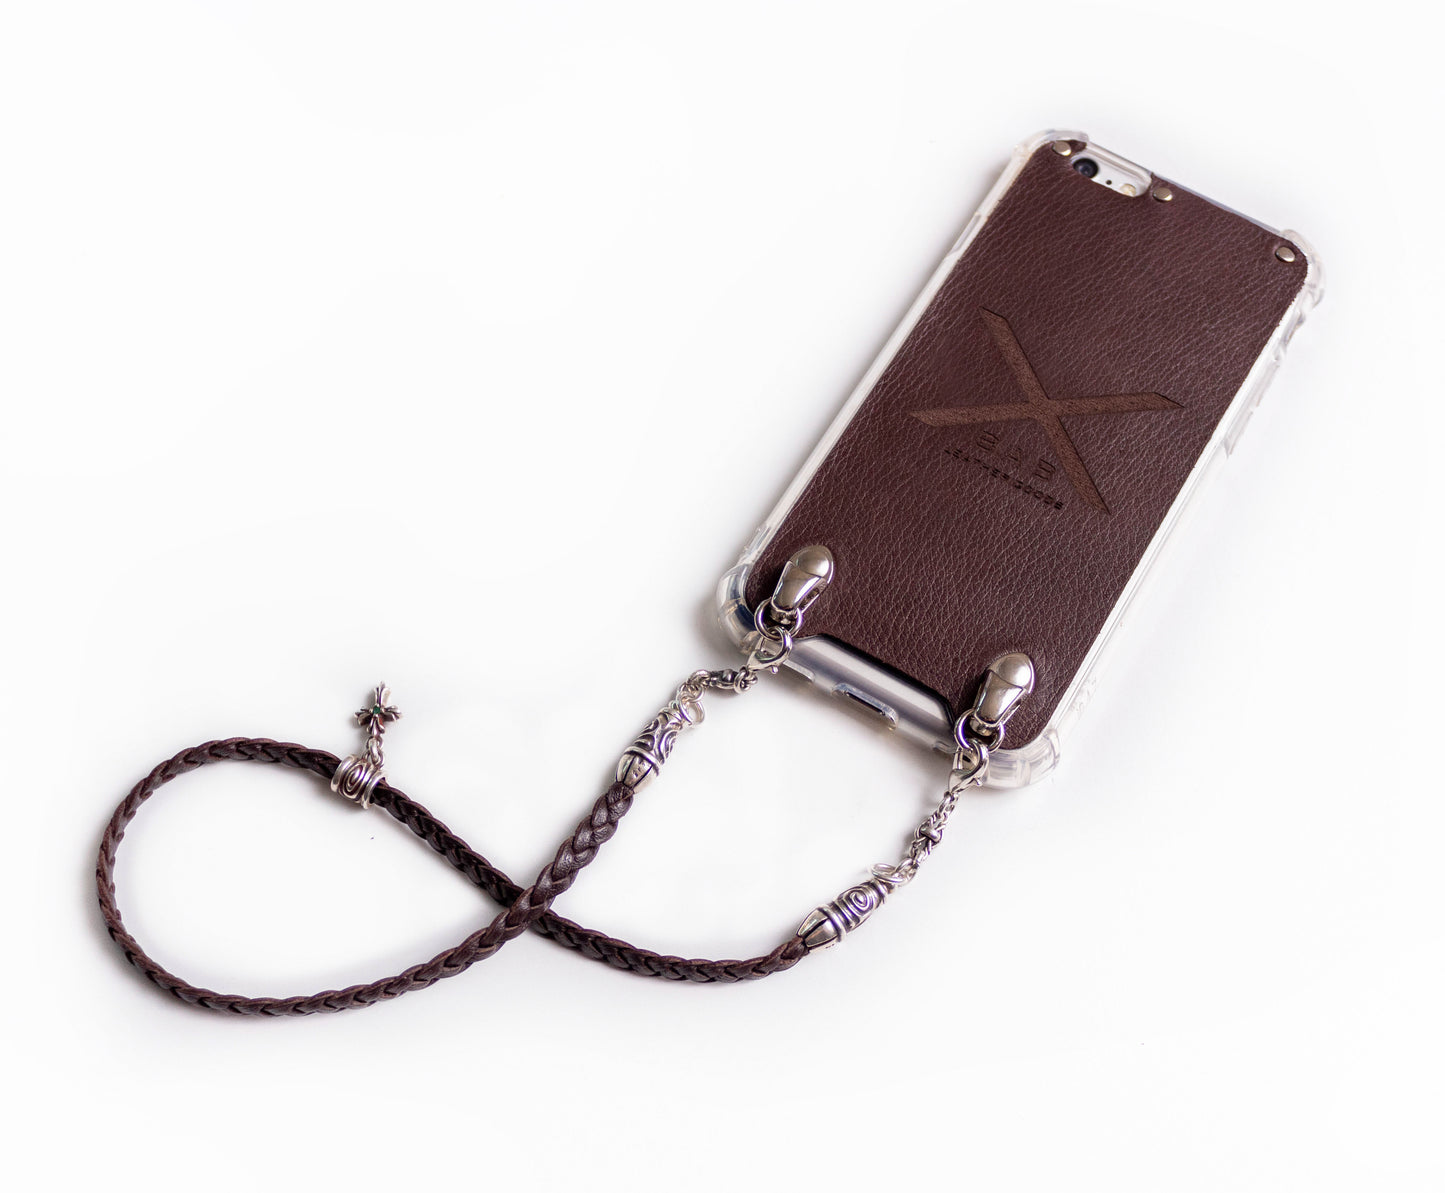 Full-Grain Genuine vegetable-tanned Leather & 925 Sterling Silver Case for iPhone. Bracelet/Choker/Strap three double strands of Hand-braided Leather, Brown or Black.- F24​